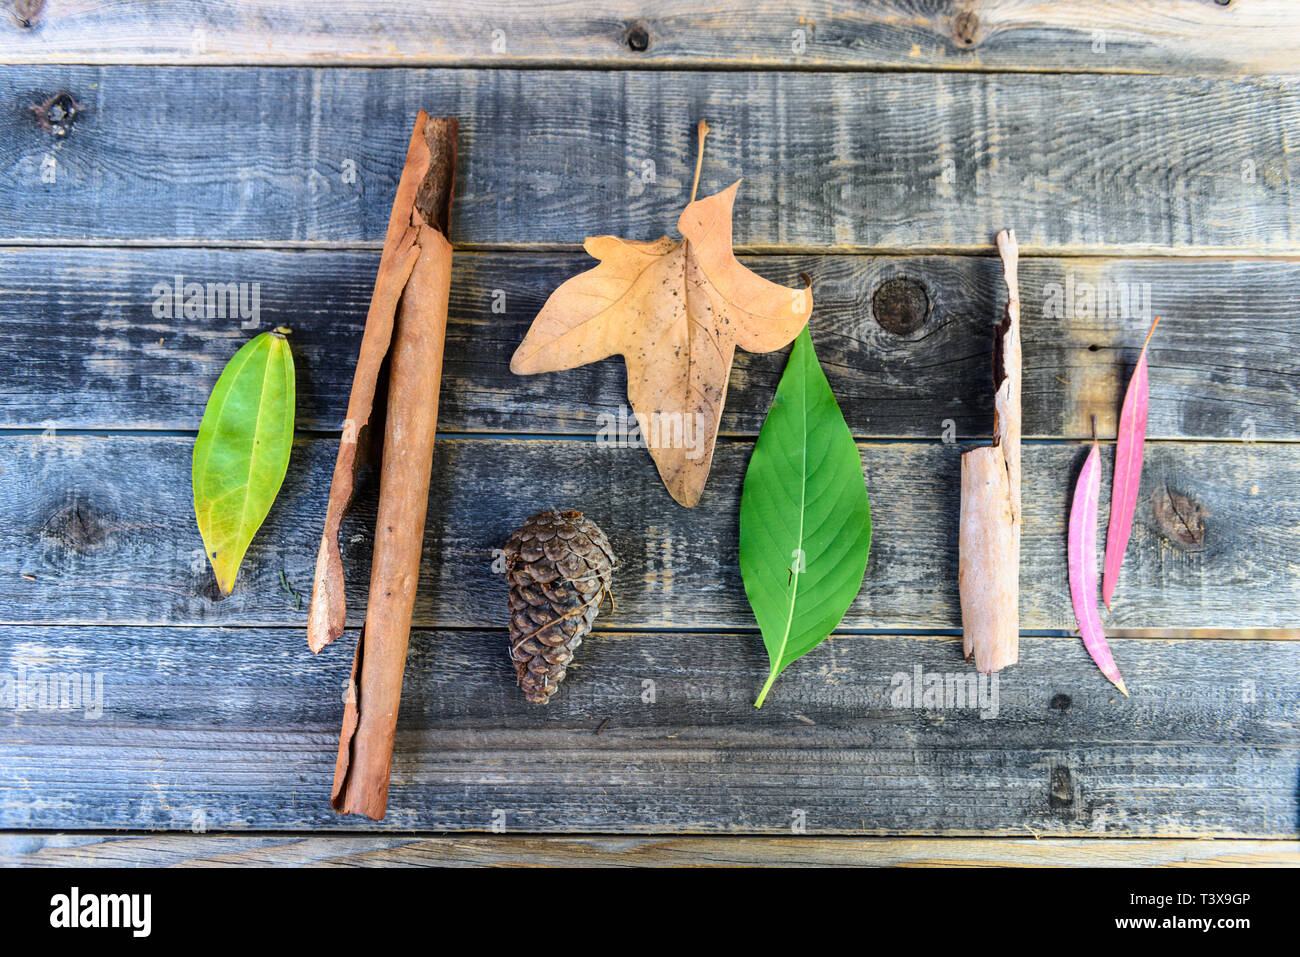 Botanical still life of leaves of different sizes, shapes and colors of green, brown and red, arranged on a weathered wooden background. Stock Photo